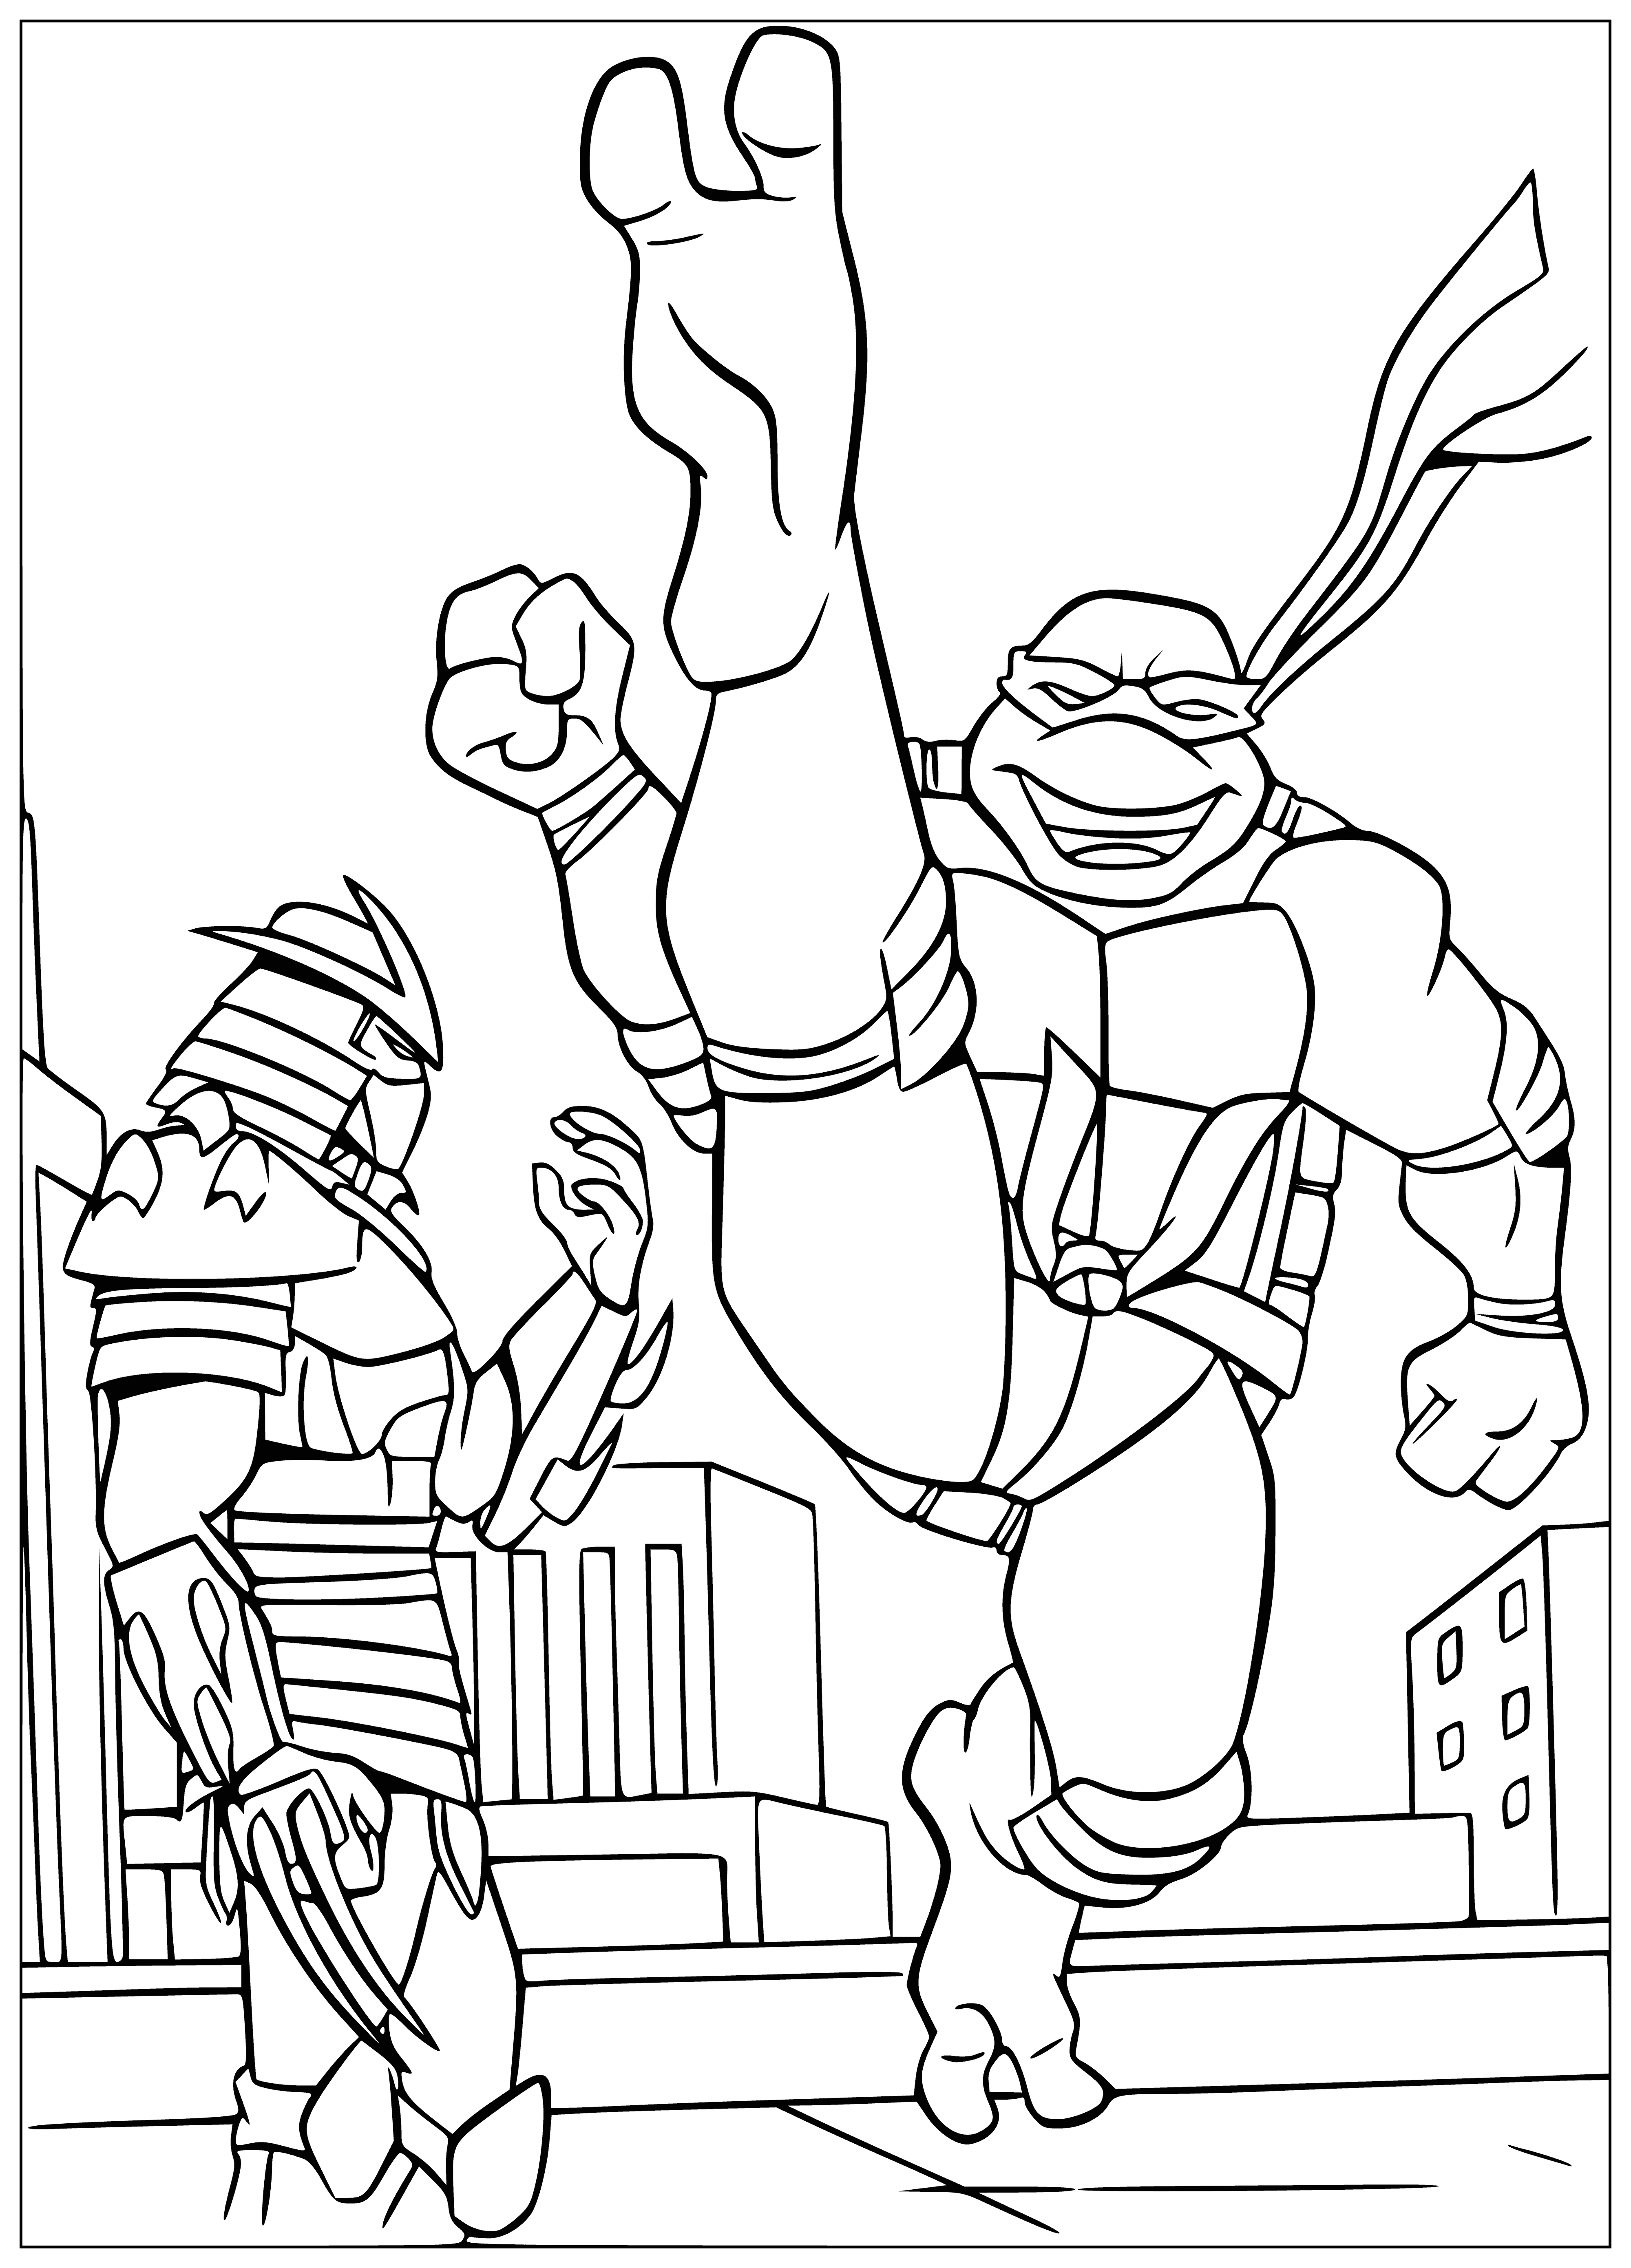 coloring page: The Ninja Turtles are in an epic battle with Shredder. Who will win?